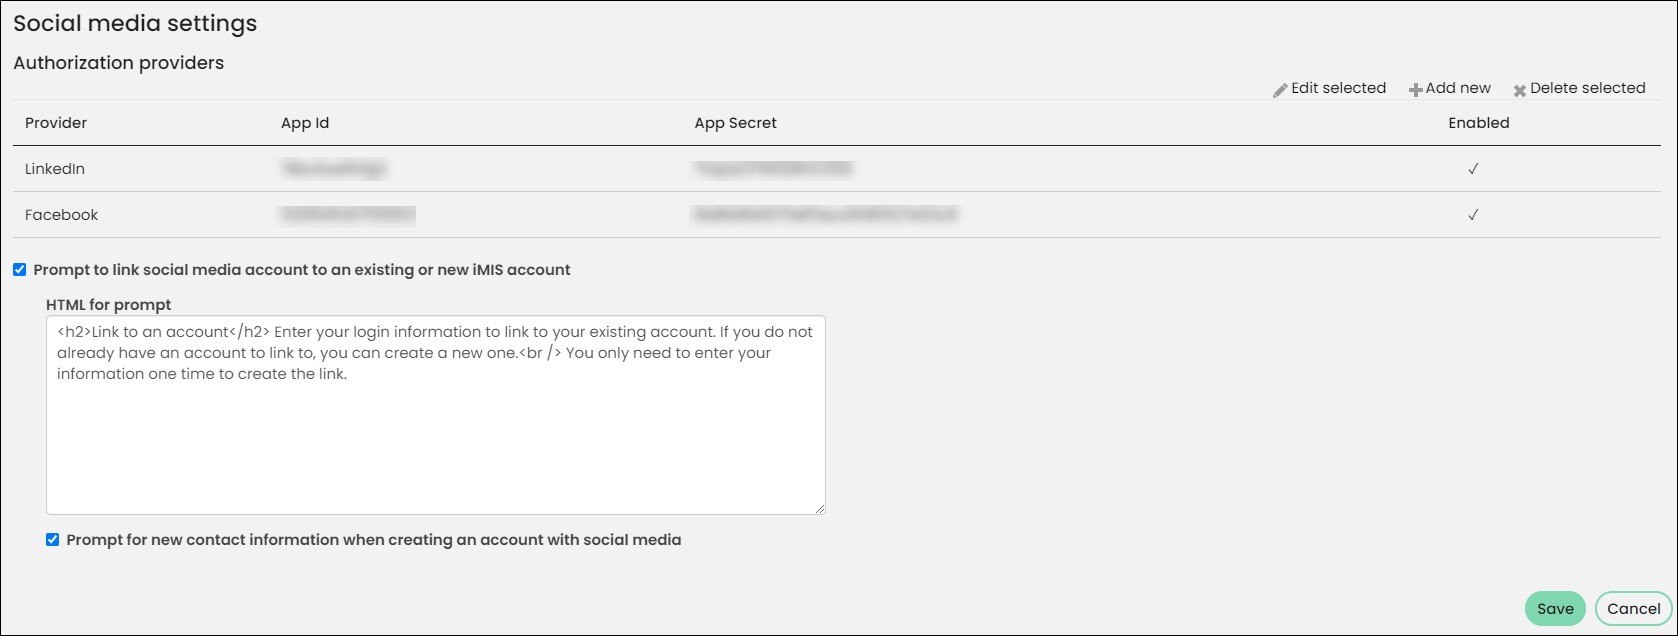 Ensuring the Contact Account Creator has an option to create an account